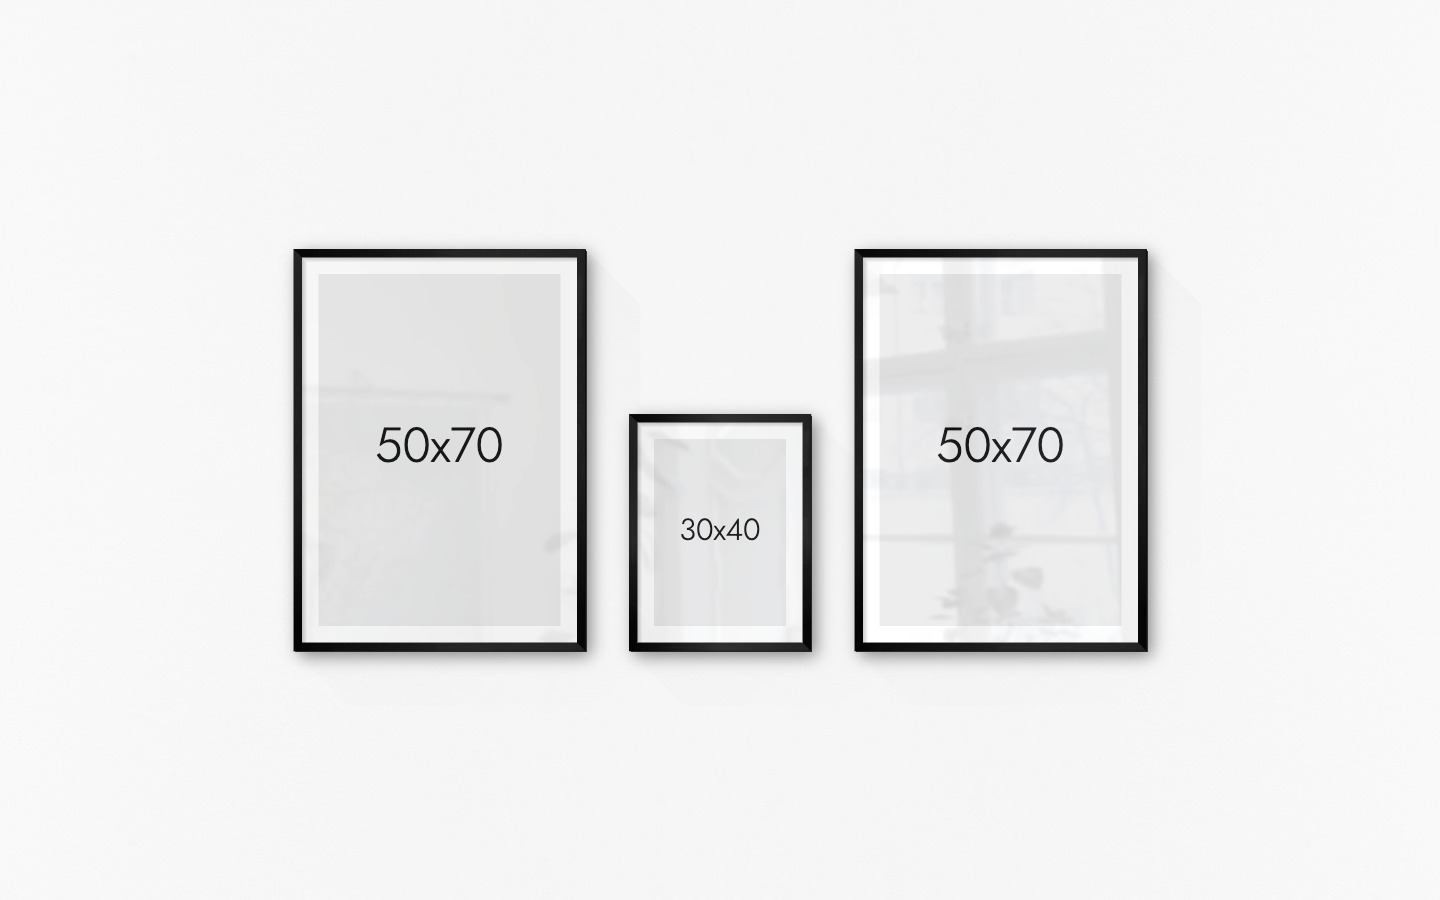 Gallery wall with picture frames in black in sizes 50x70 and 30x40